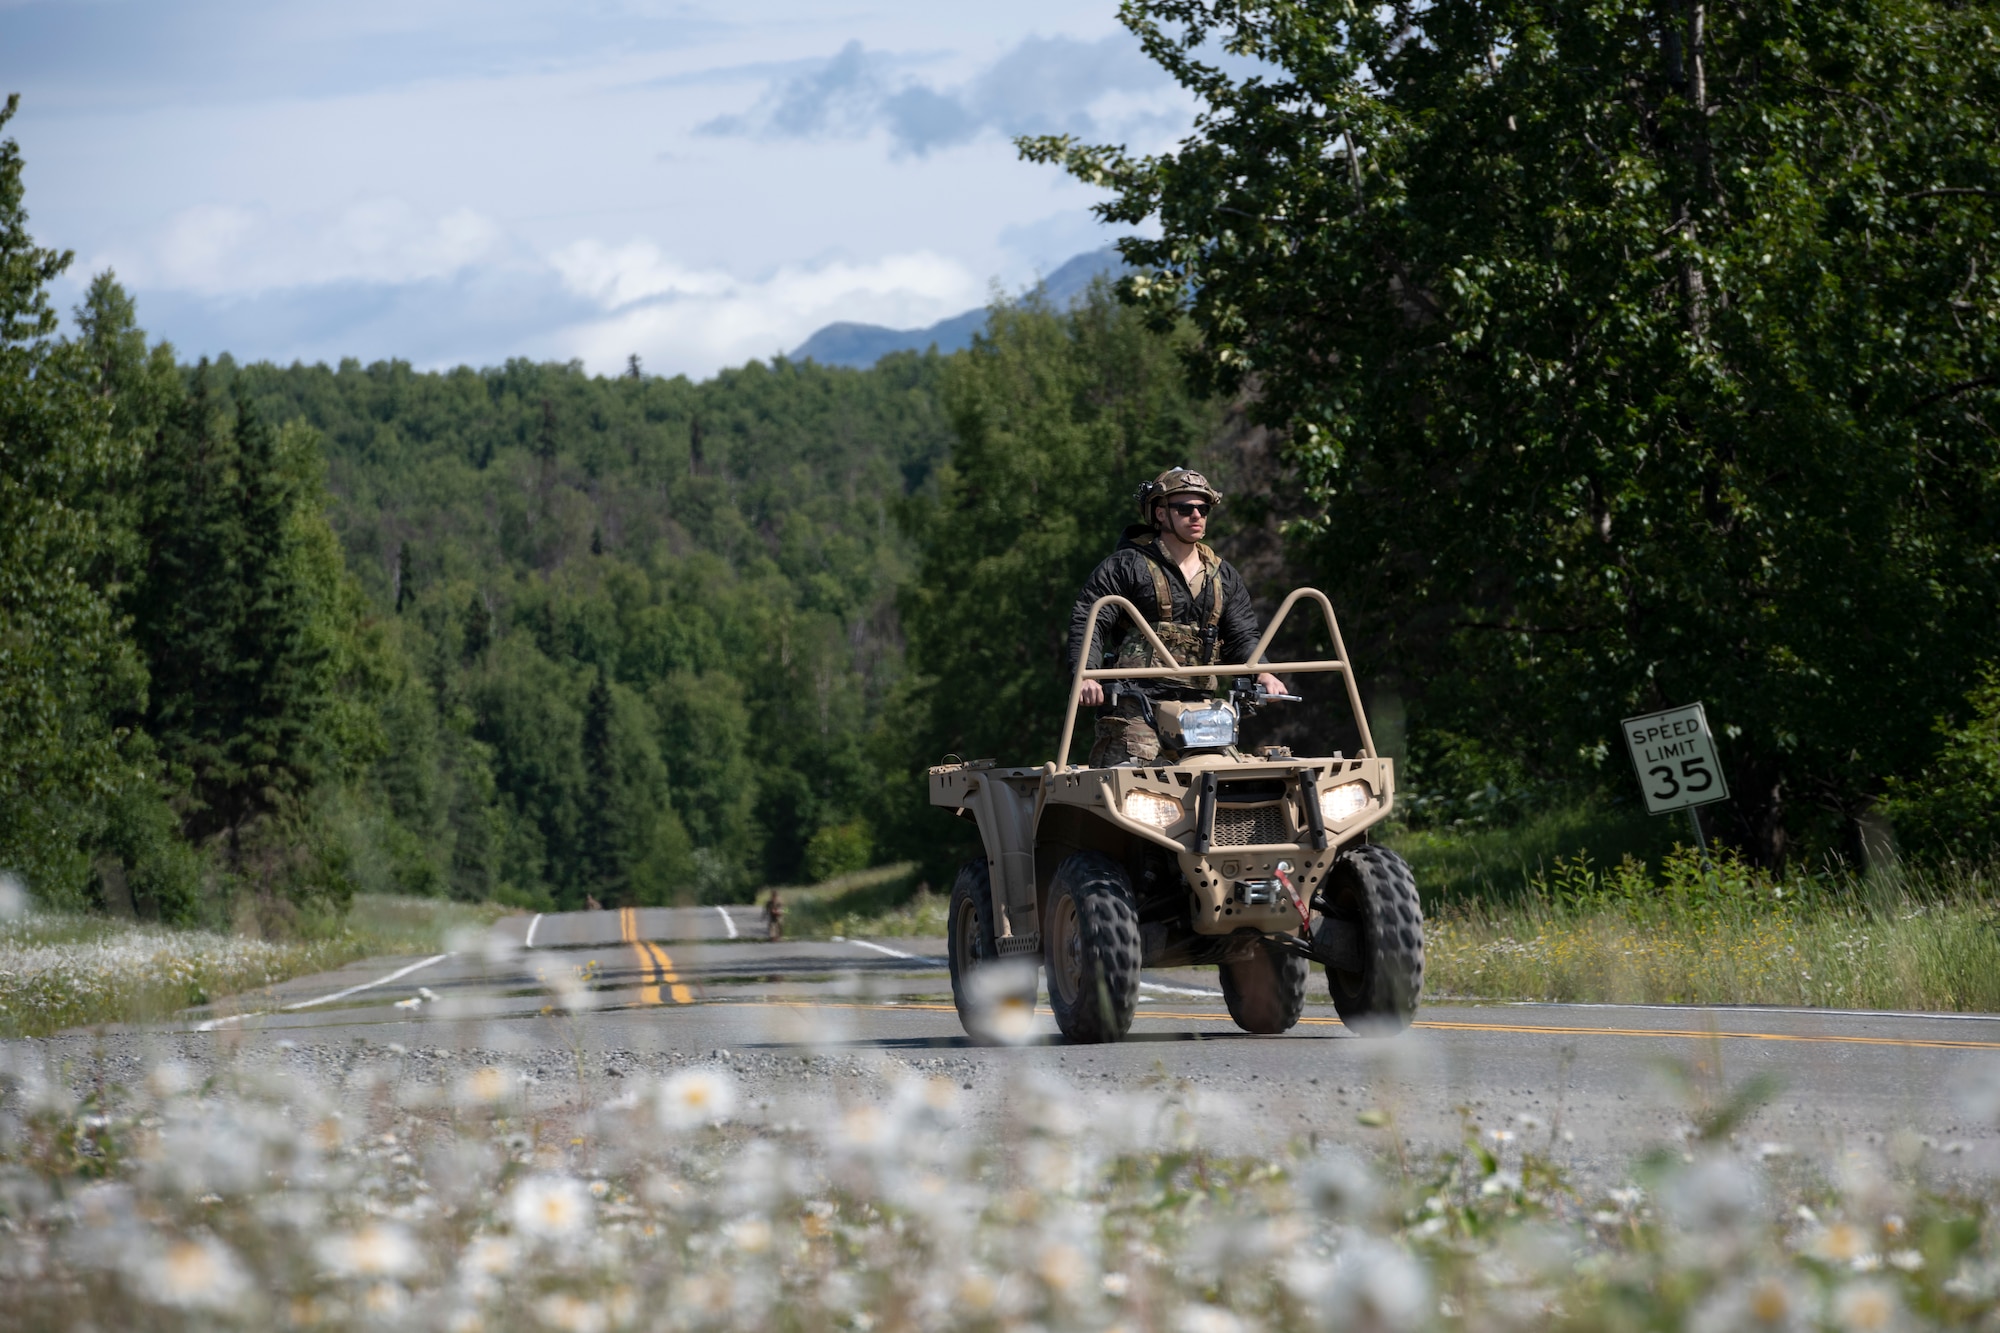 U.S. Air Force Staff Sgt. Austin George, tactical air control party (TACP) specialist, 3rd Air Support Operations Squadron, rides an all-terrain vehicle while monitoring a ruck run during the Chaos Challenge 2021 at Joint Base Elmendorf-Richardson, Alaska, July 14, 2021. The Chaos Challenge 2021 was a multi-day series of mental and physical contests sponsored by the 1st Air Support Operations Group with participants from the 3rd, 5th, 25th, and 604th Air Support Operations Squadrons and a guest team from the 673d Security Forces Squadron. The winner of the competition will go on to compete in Lightning Challenge 2021 to determine the best two-man TACP team in the Air Force.